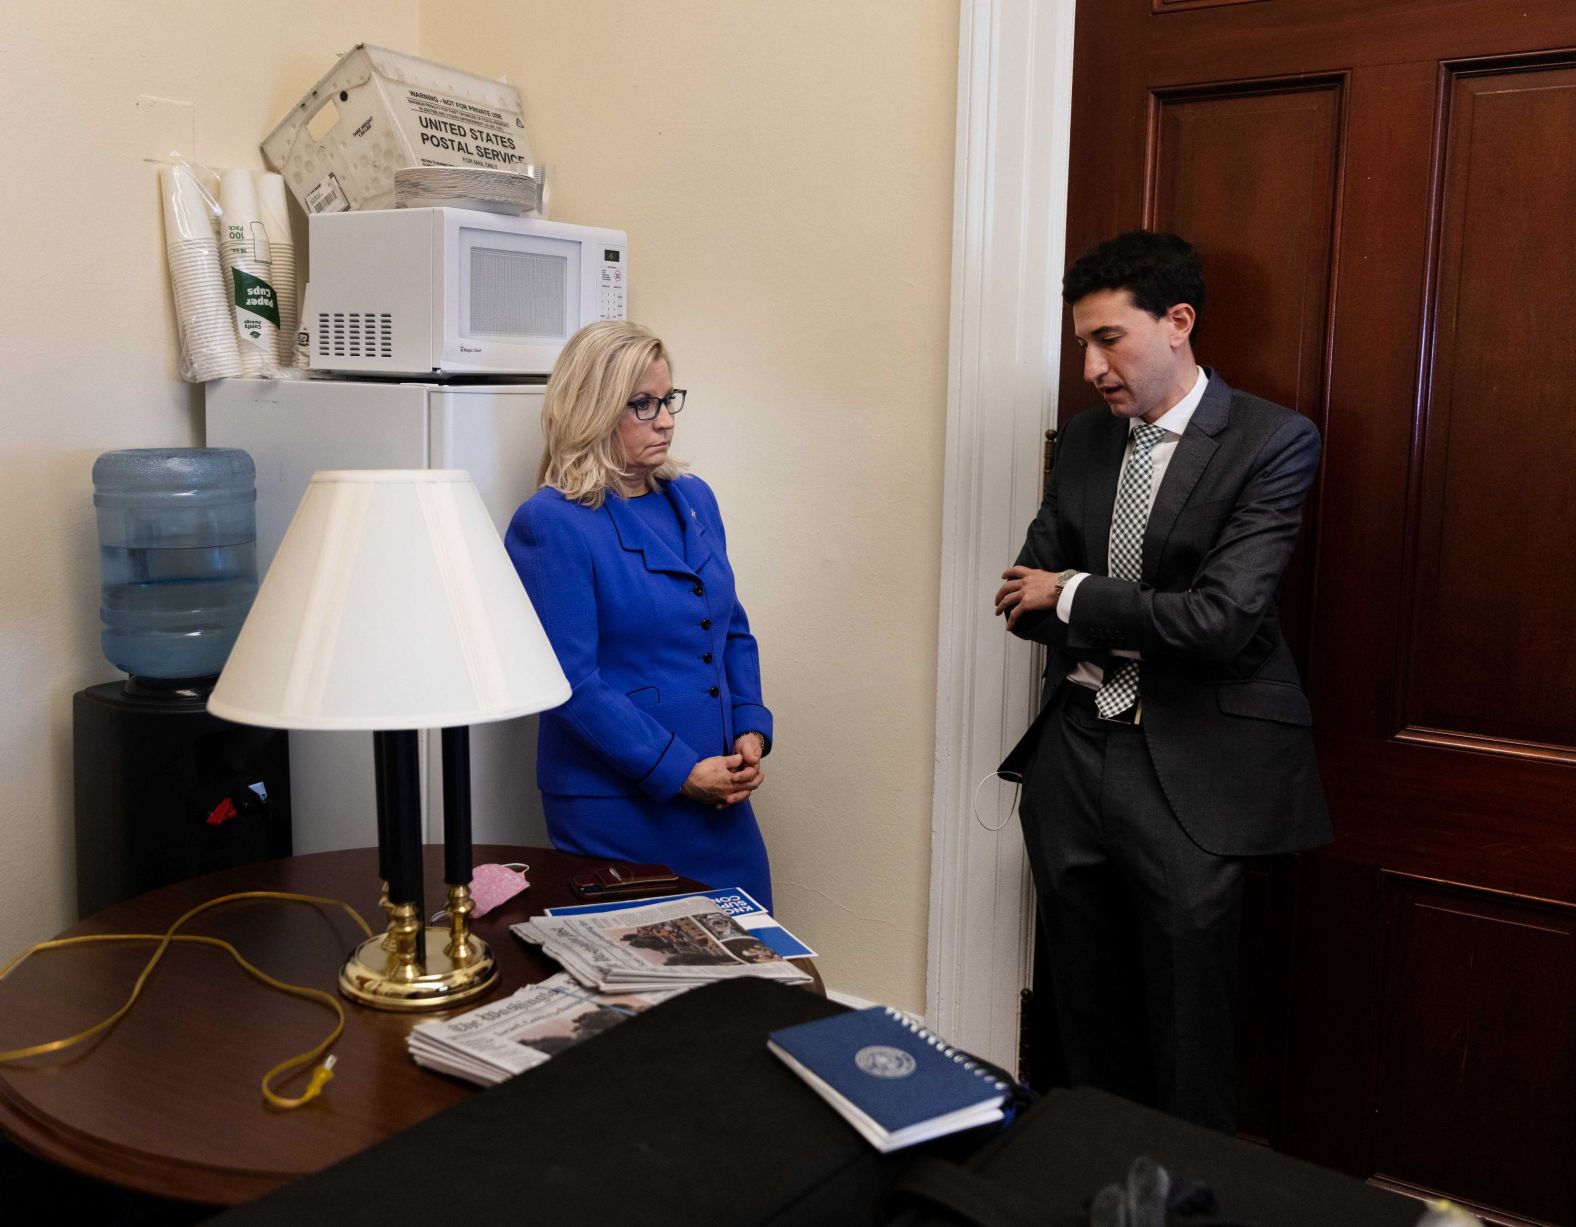 Cheney meets with her communications director after returning to her office on Wednesday. "It was not a cause for celebration, certainly. But she wasn't like distraught or anything," Kennerly said. "She was pretty businesslike. She knew what was going to happen and accepted the outcome."